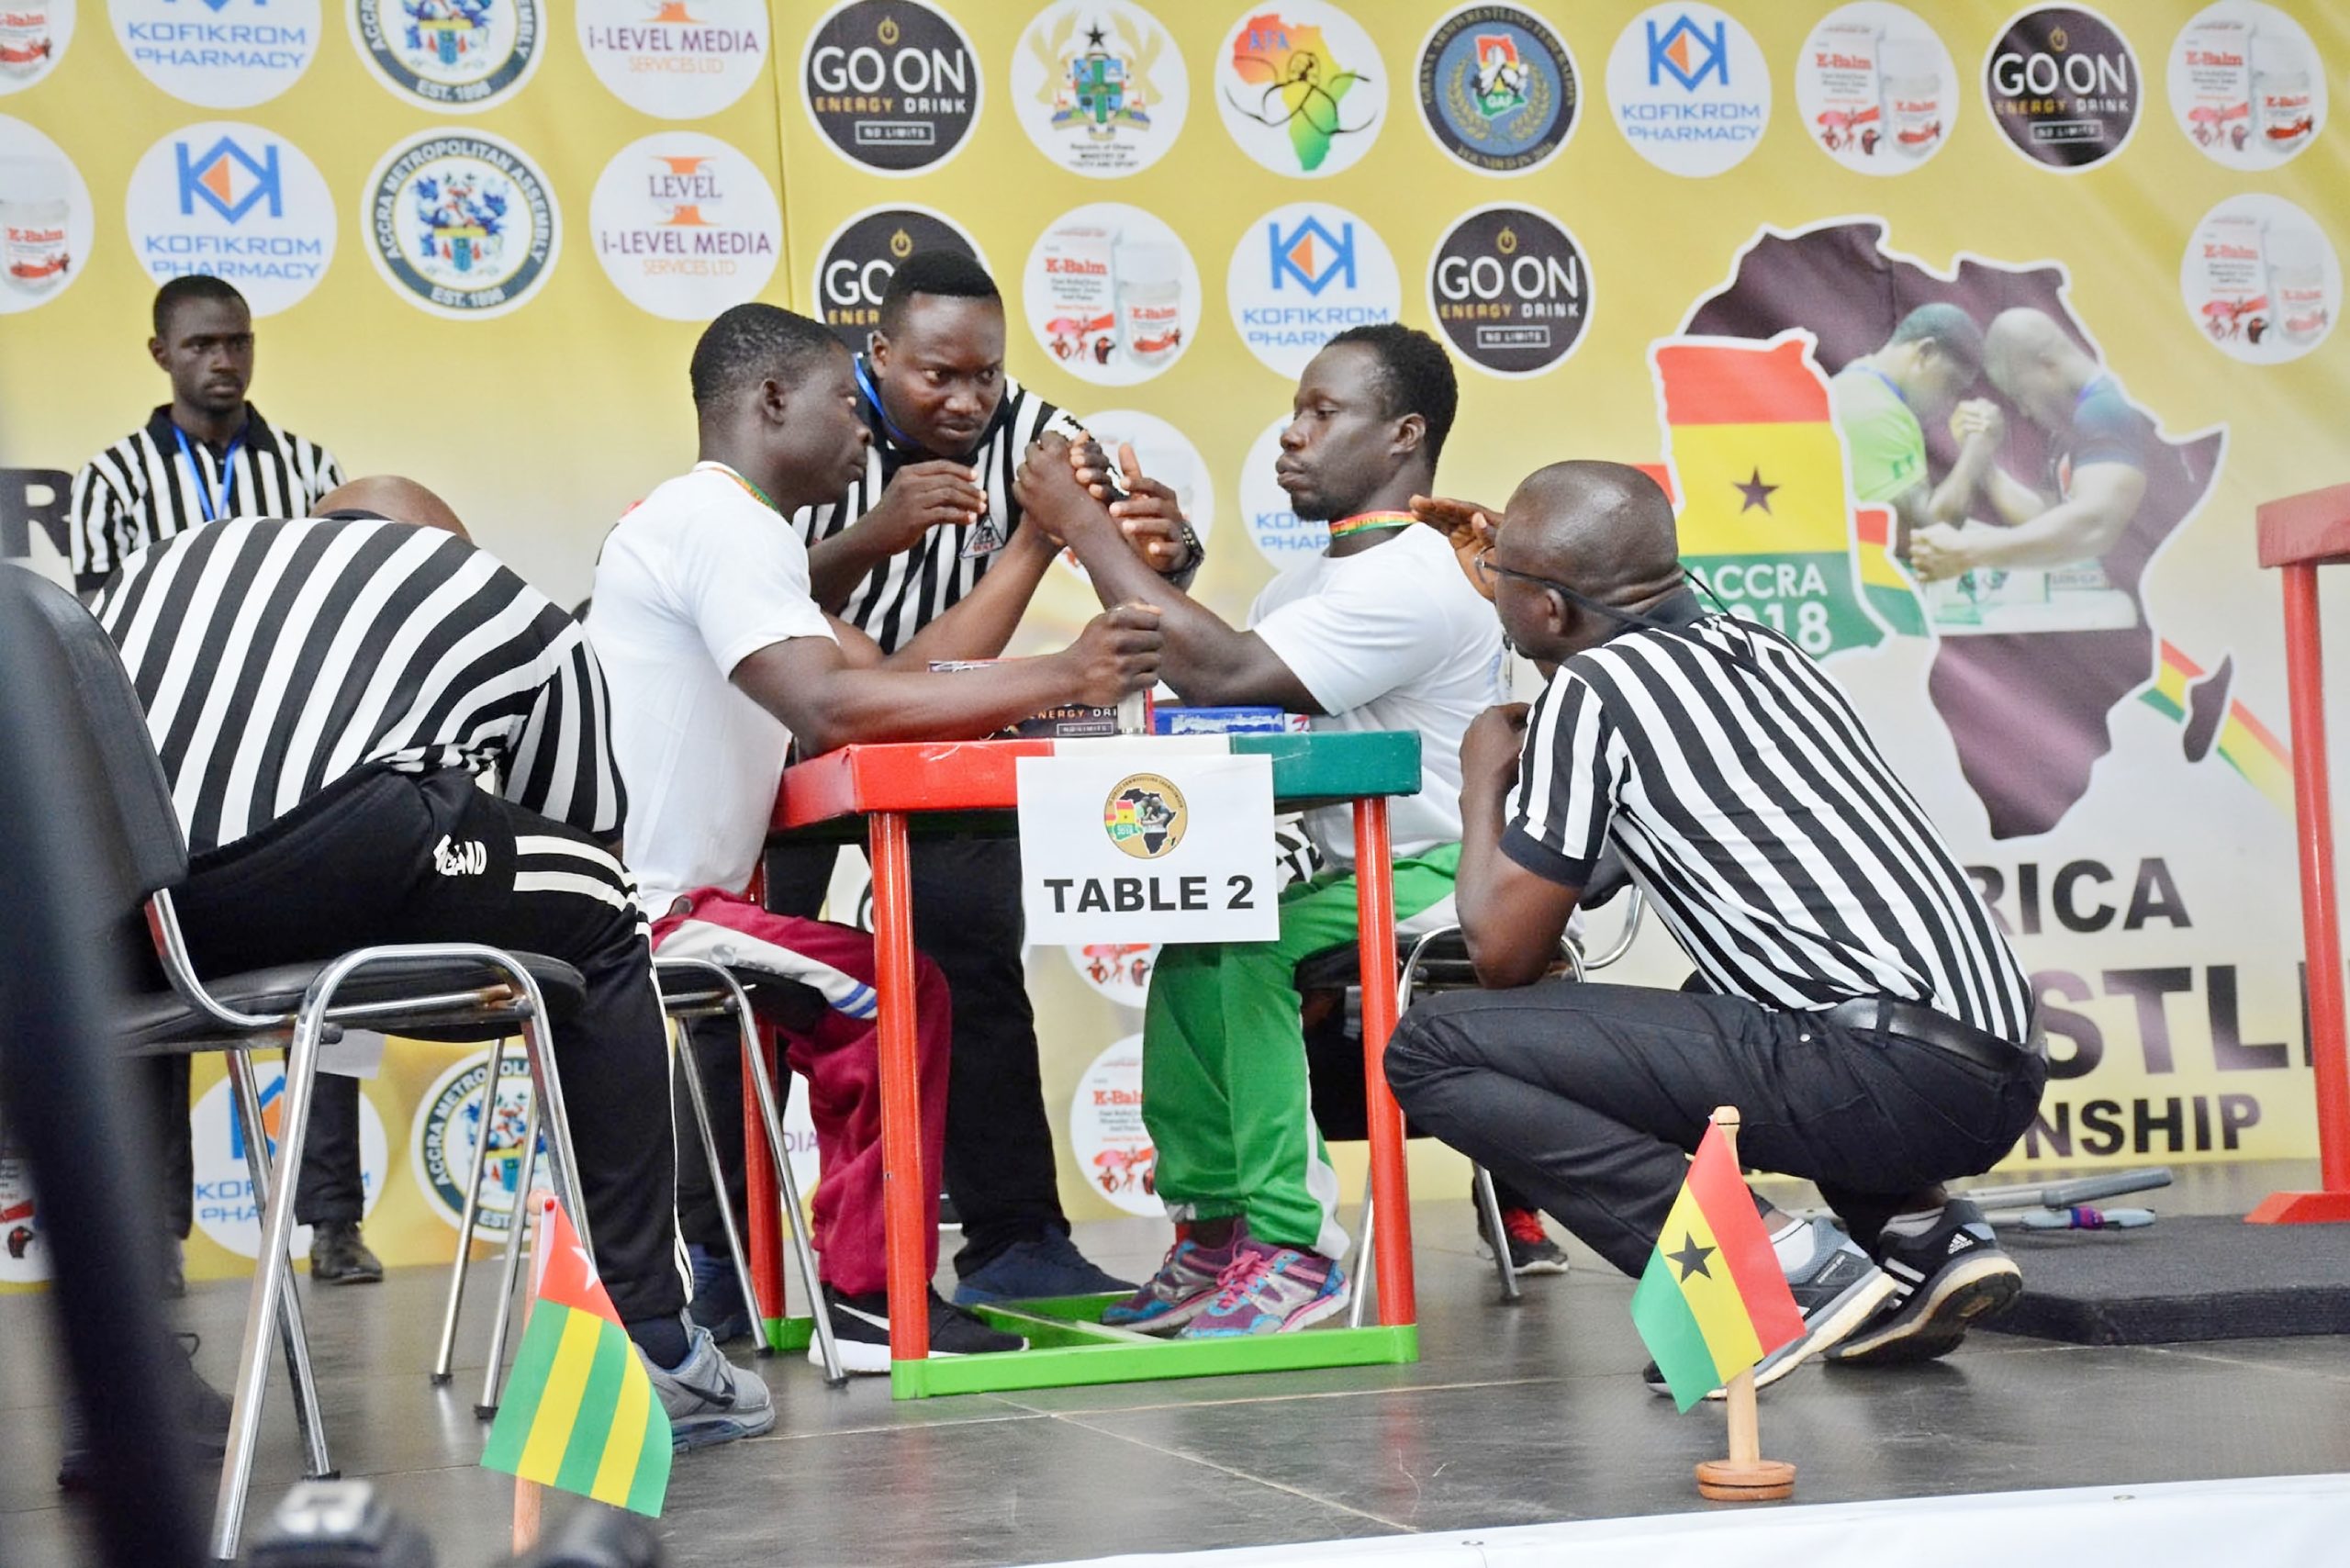 Africa Armwrestling names Committee to advise on the playing of Armwrestling.